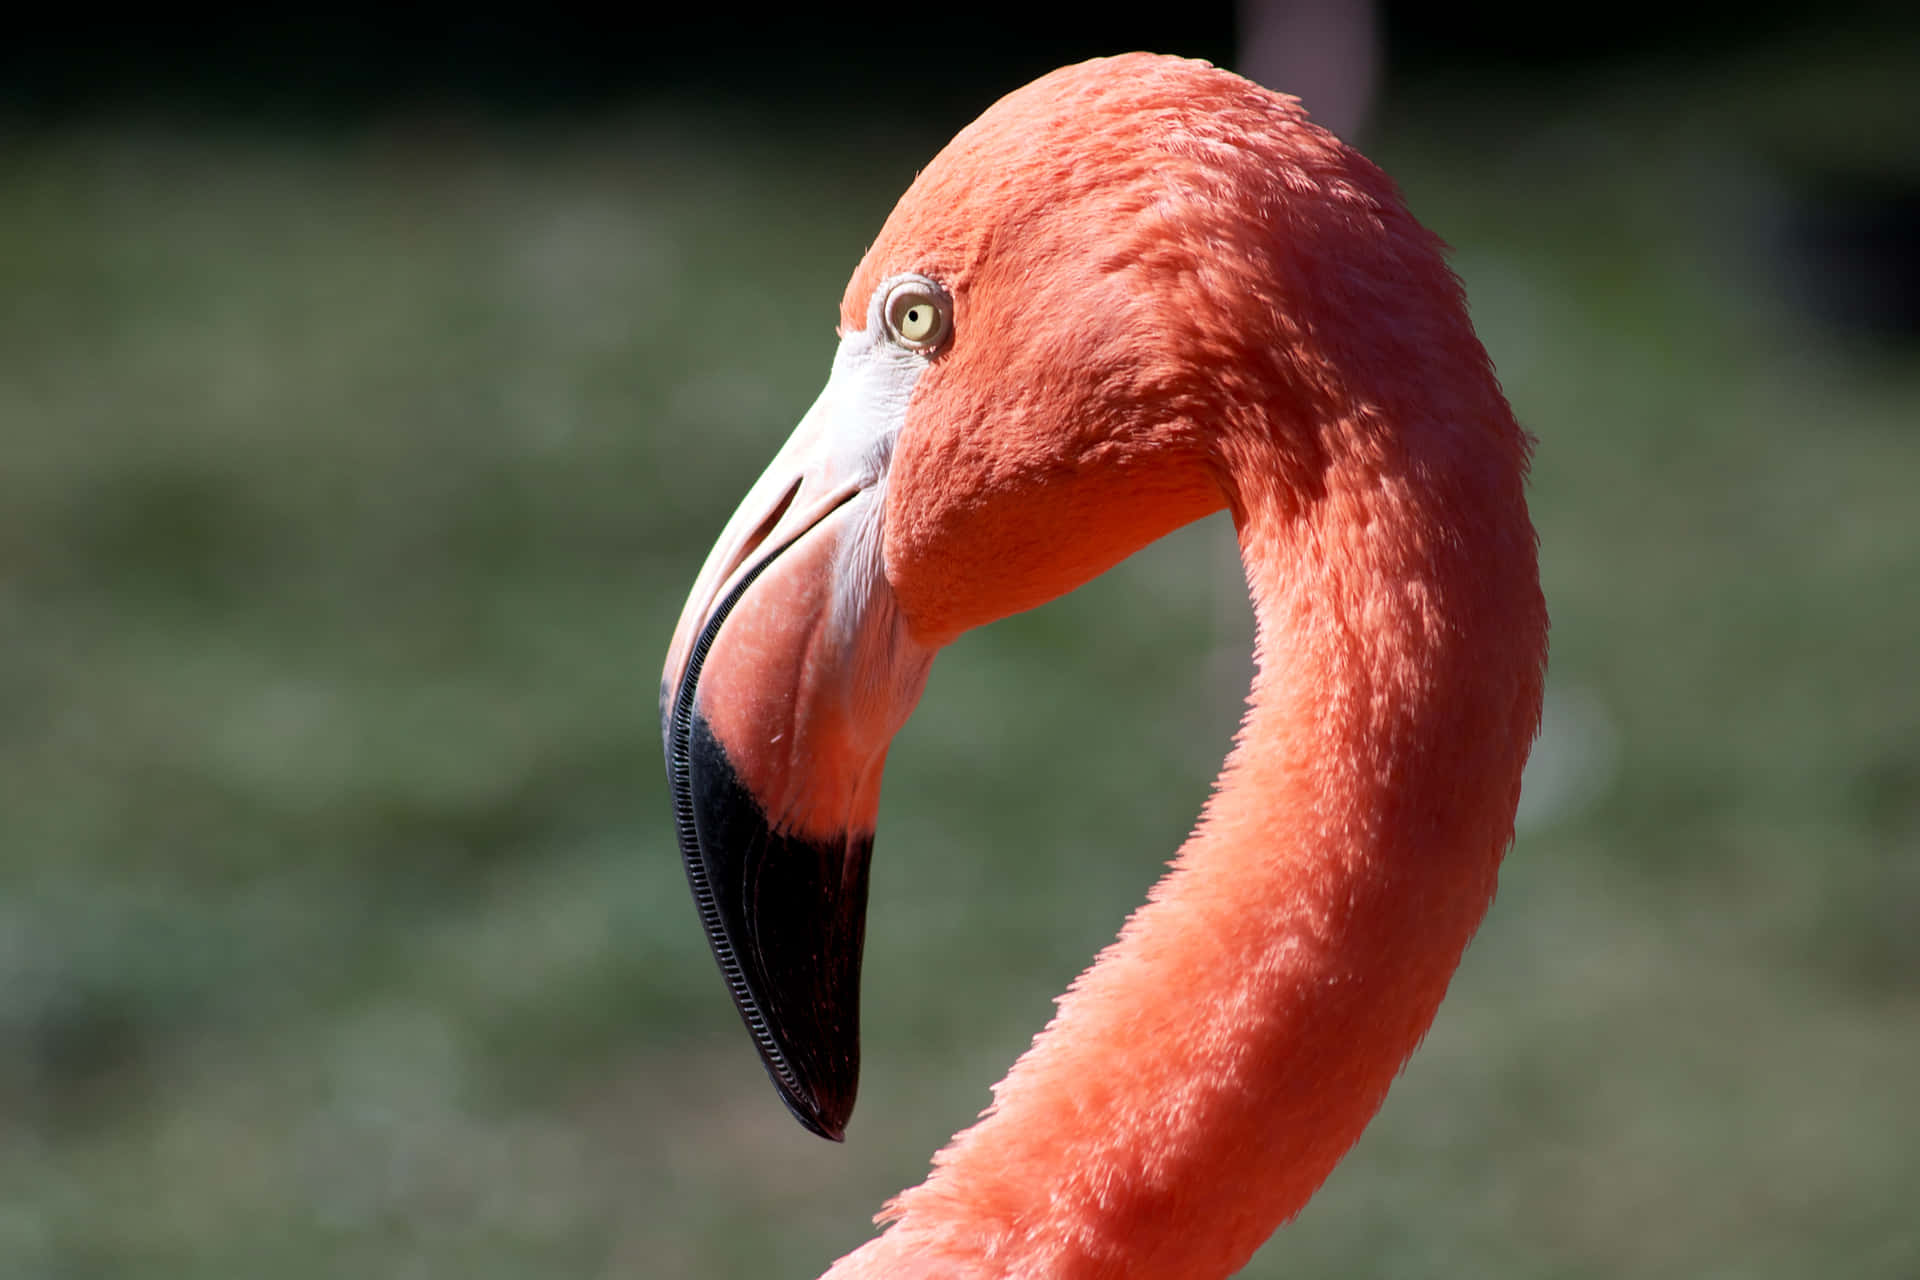 ____ An image of a bright-pink flamingo taking flight in a welcoming blue sky